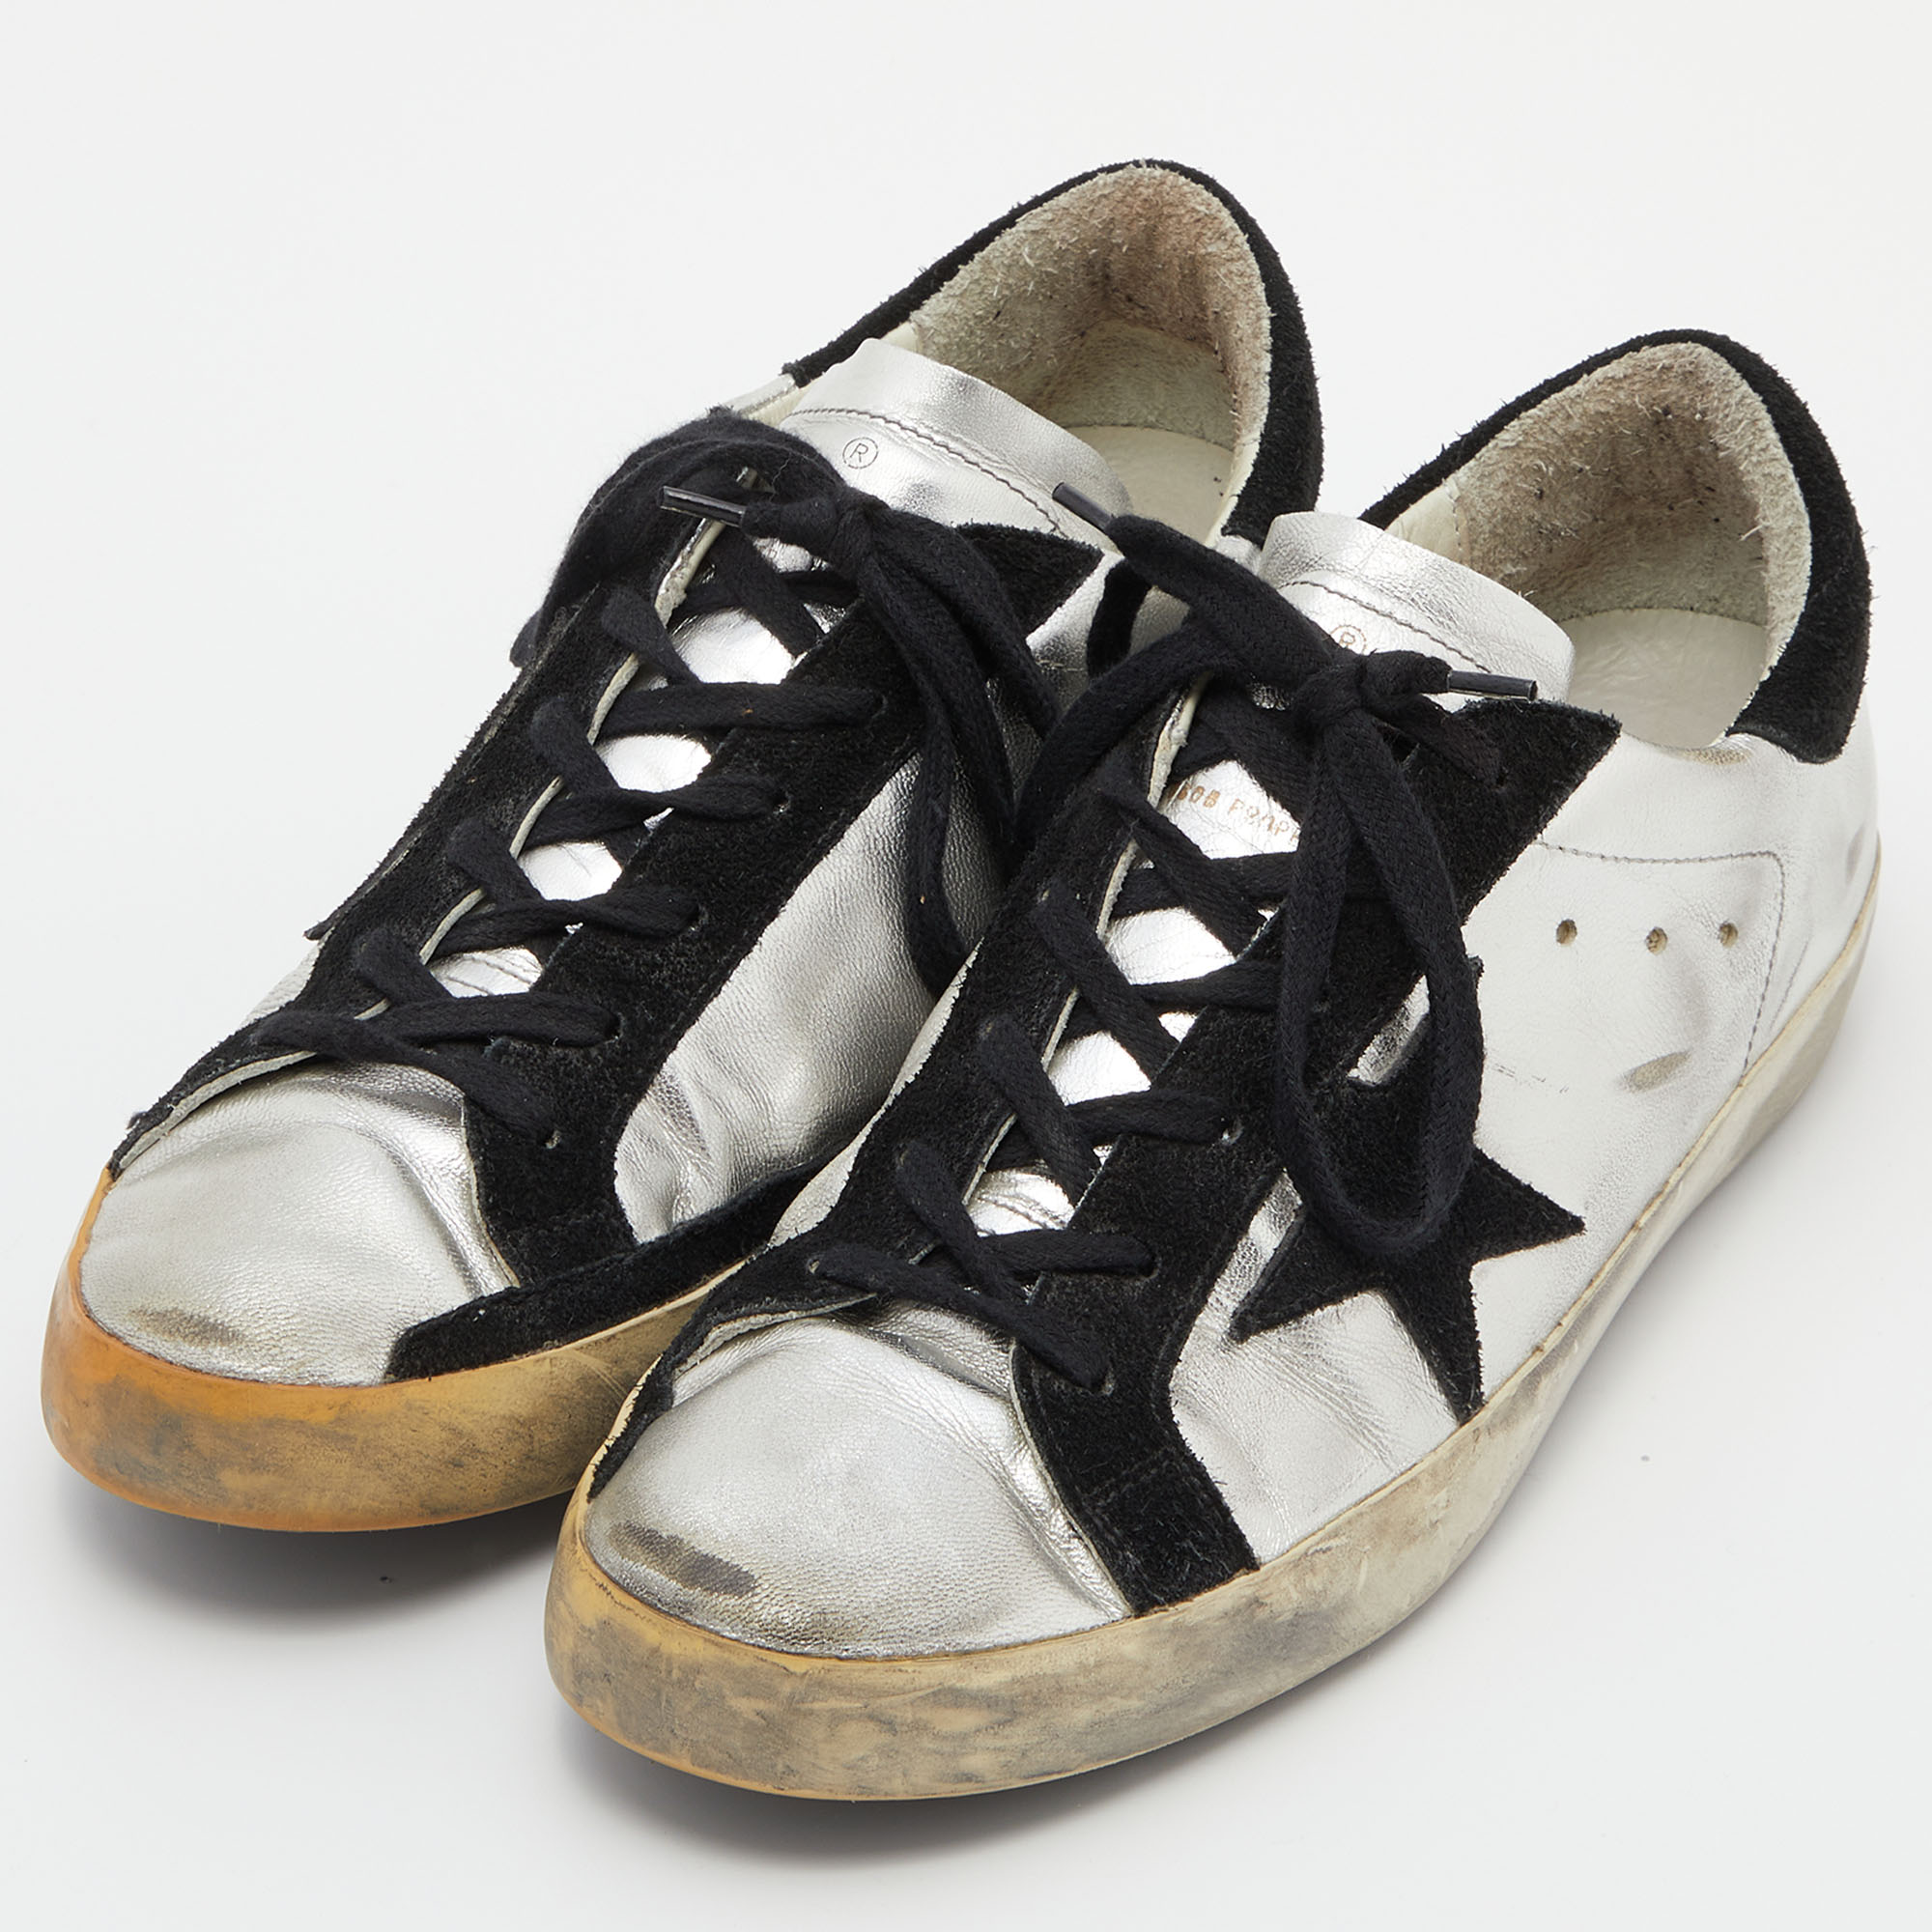 

Golden Goose Metallic/Black Leather and Suede Superstar Sneakers Size